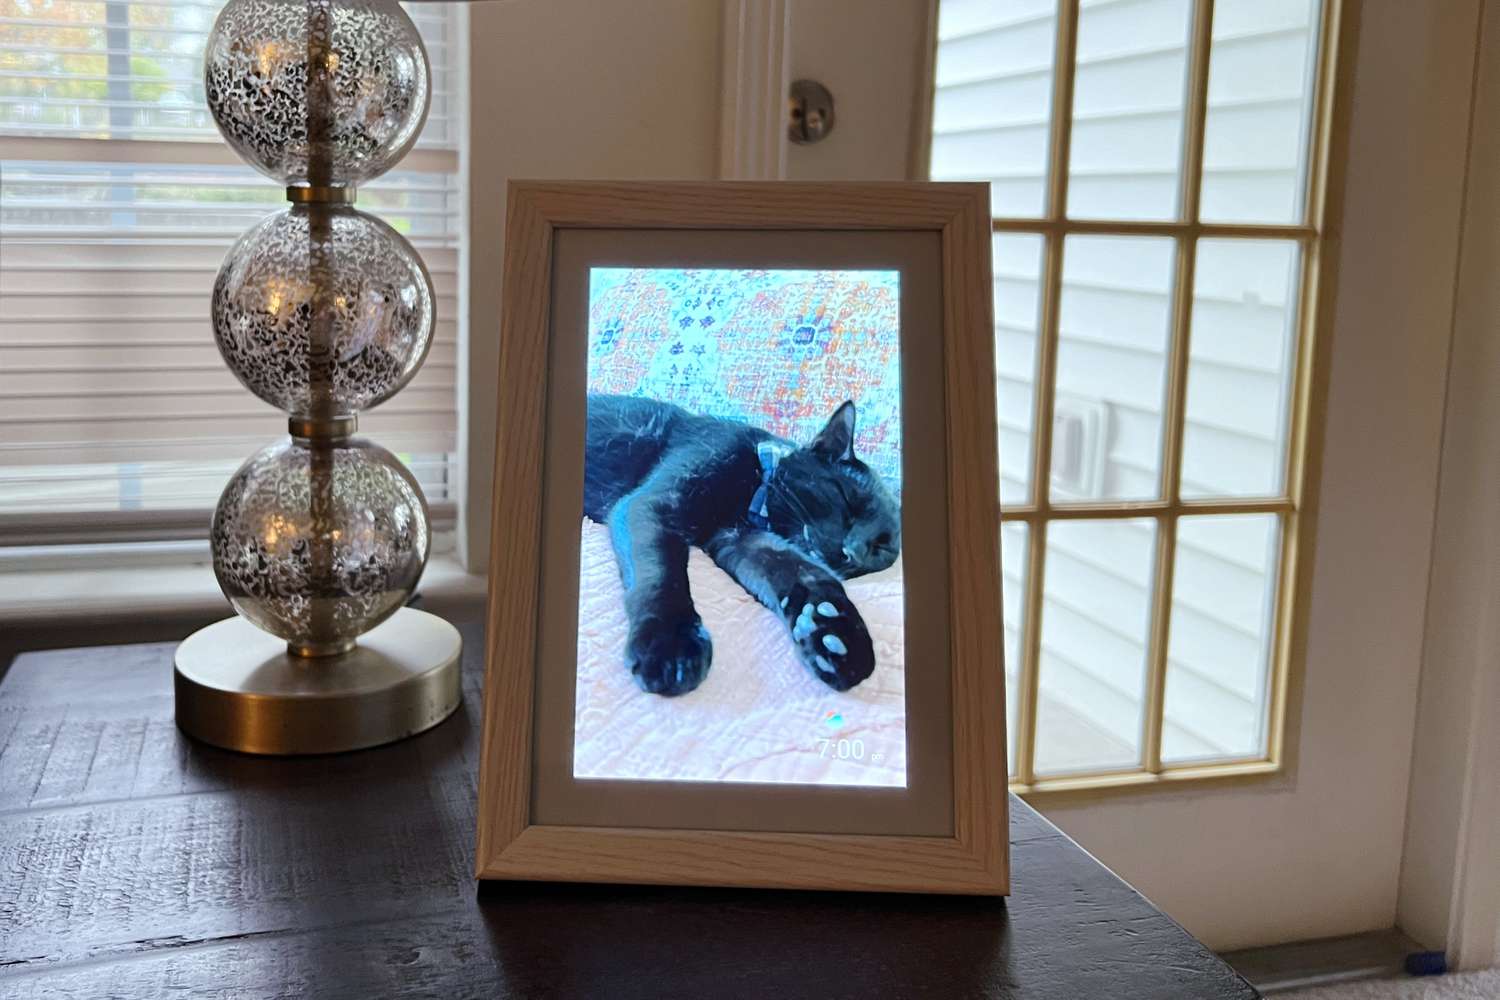 The Aeezo WiFi Digital Picture Frame in portrait mode with a picture of a cat displayed.